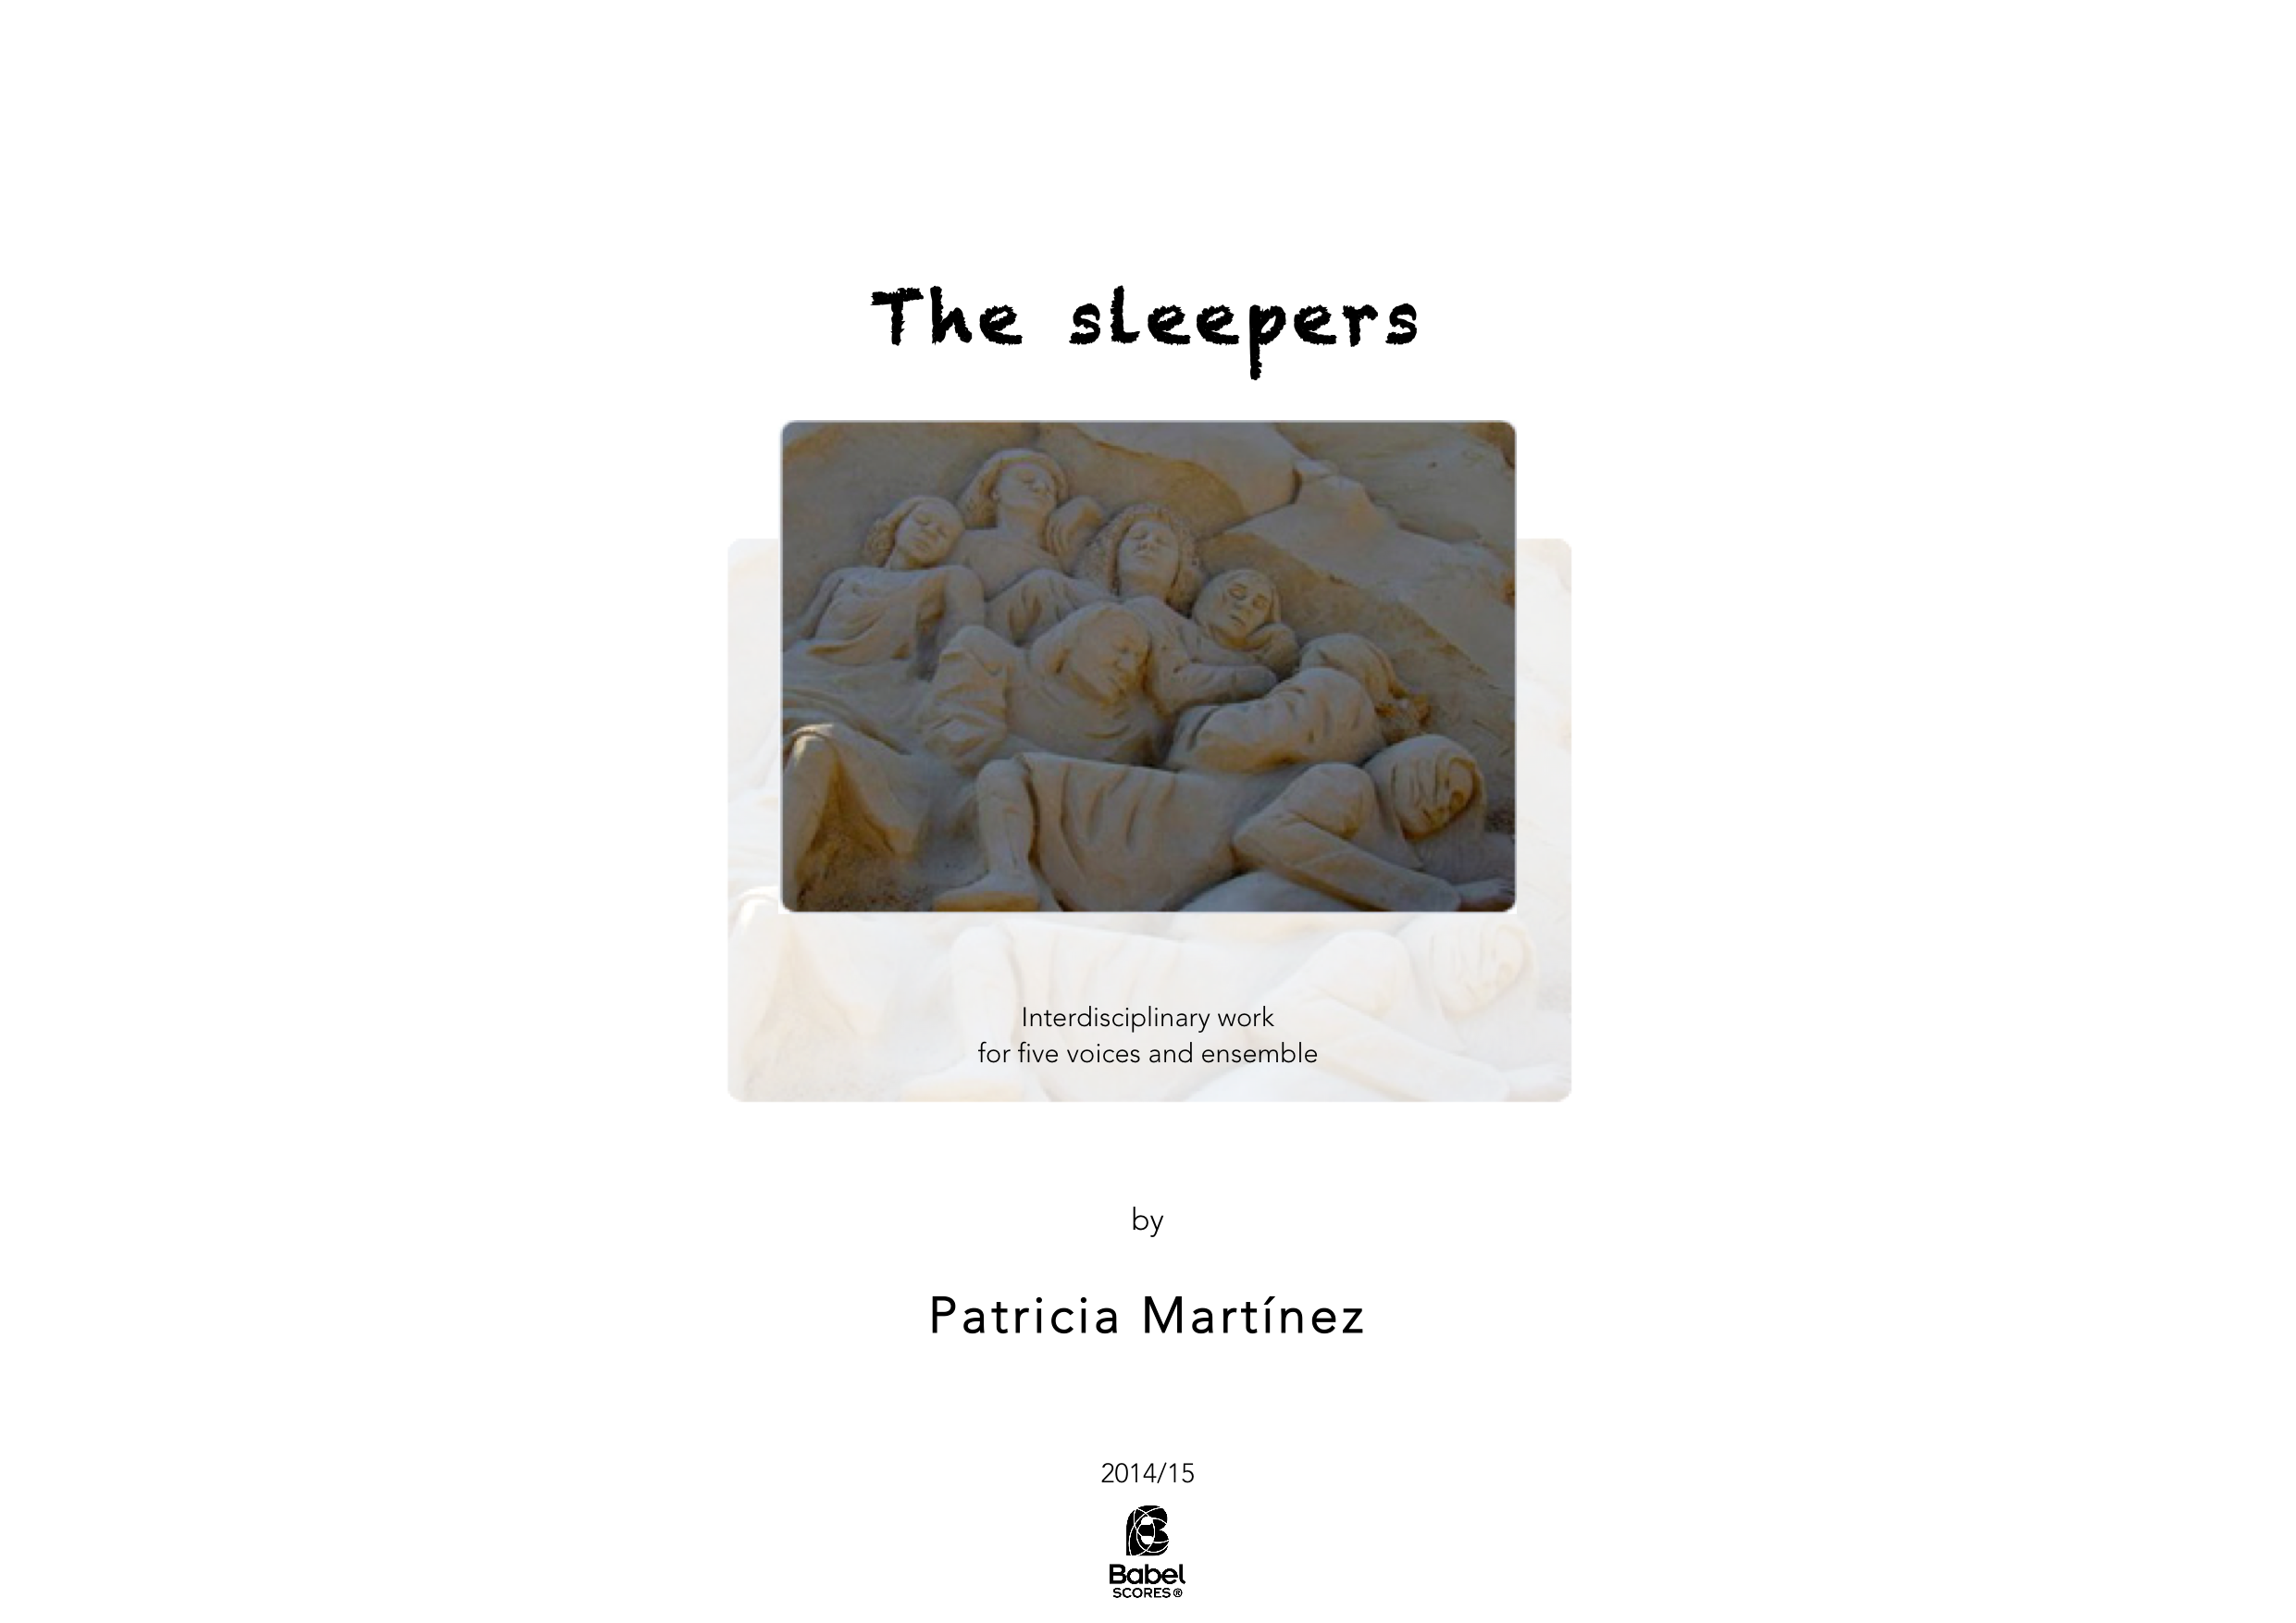 The sleepers A3 z 3 1 431